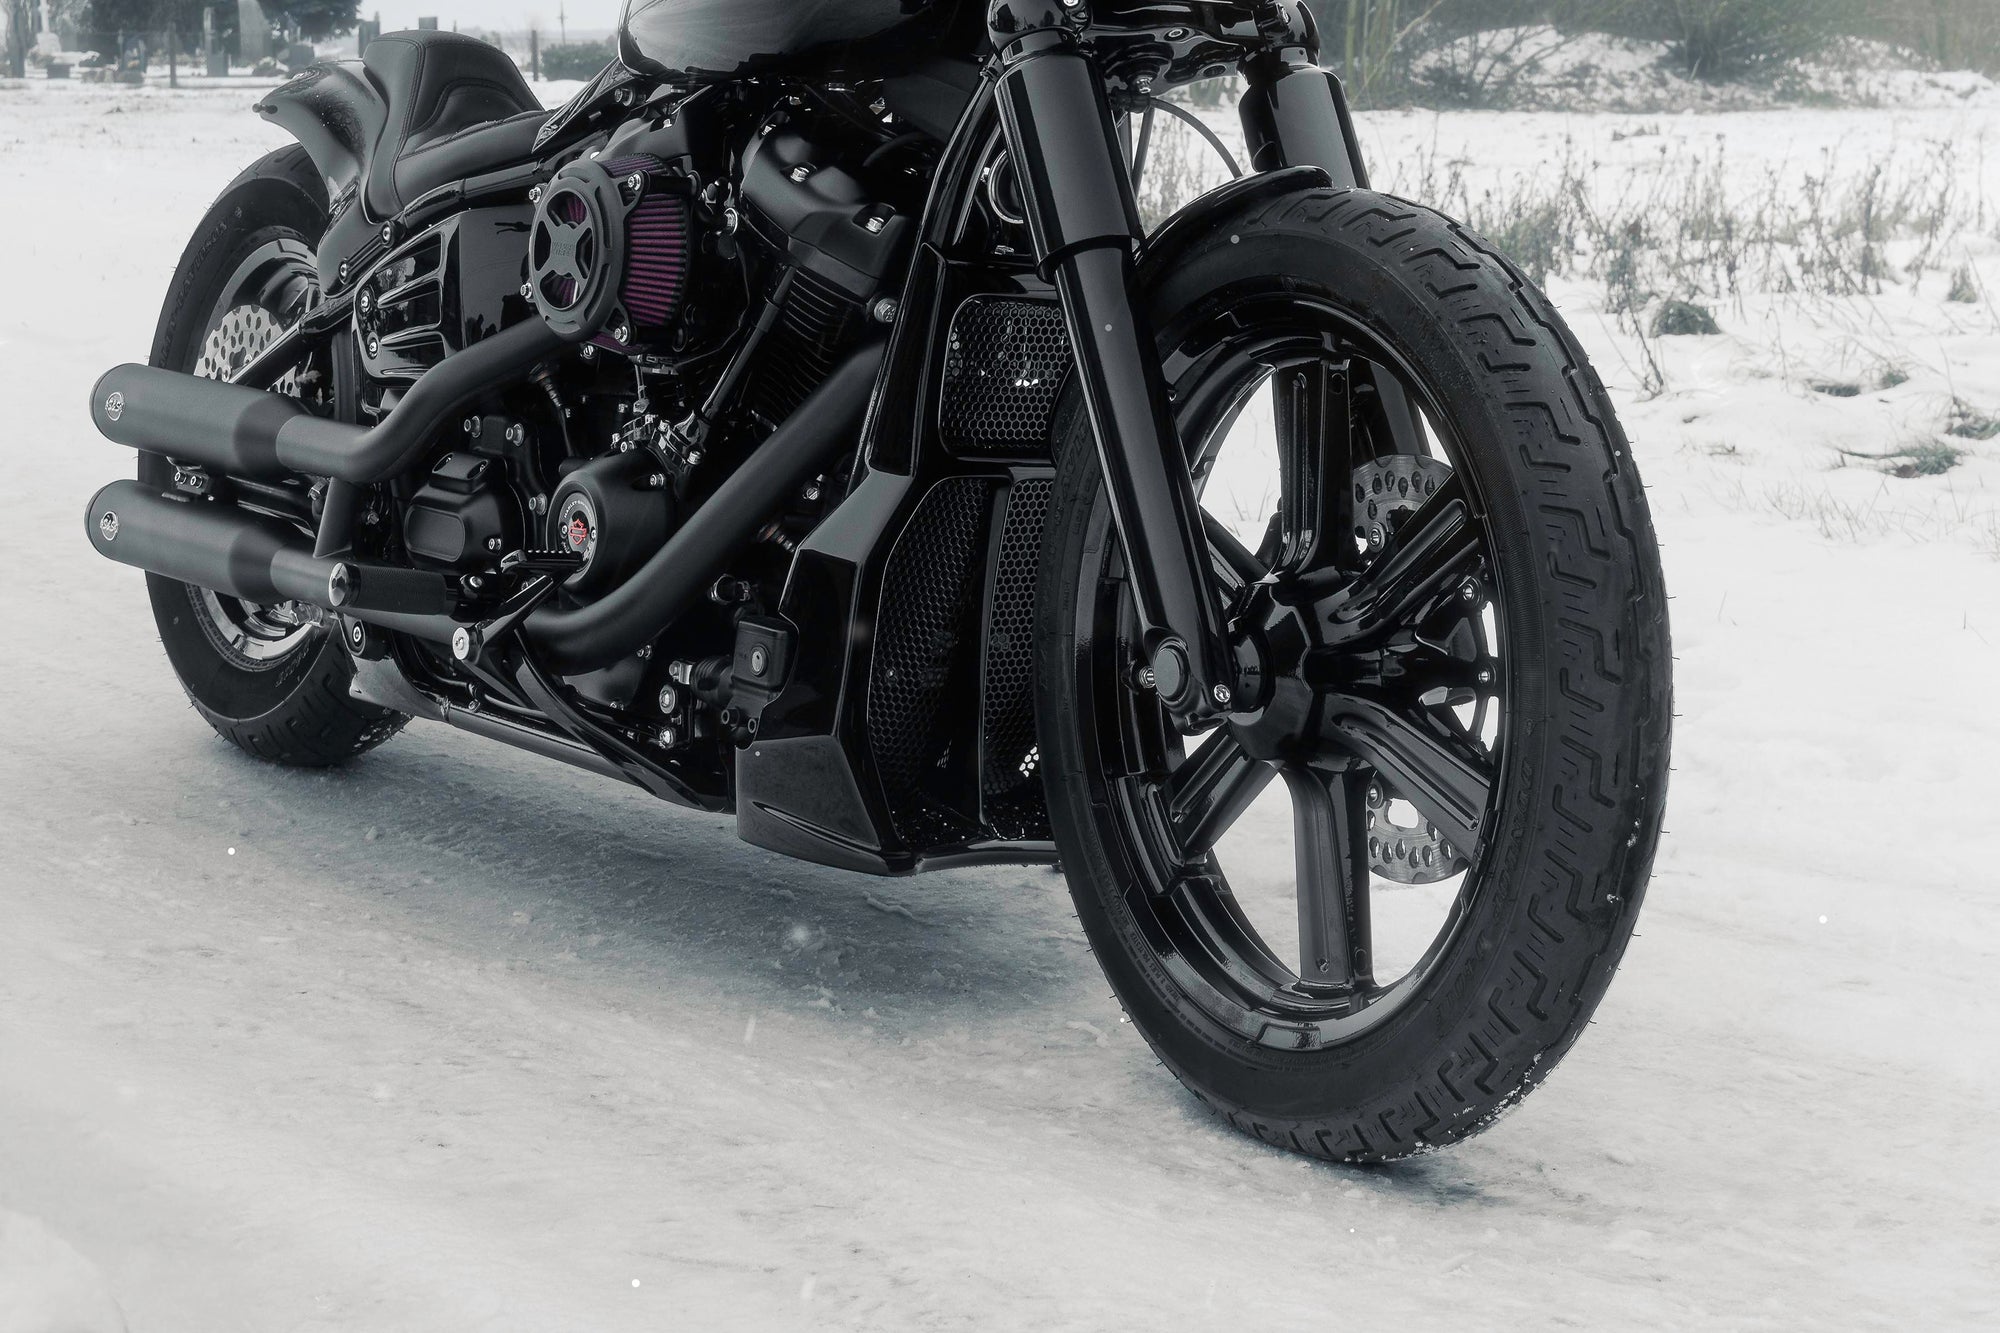 Zoomed Harley Davidson Softail motorcycle with Killer Custom parts from the front outside on a snowy day